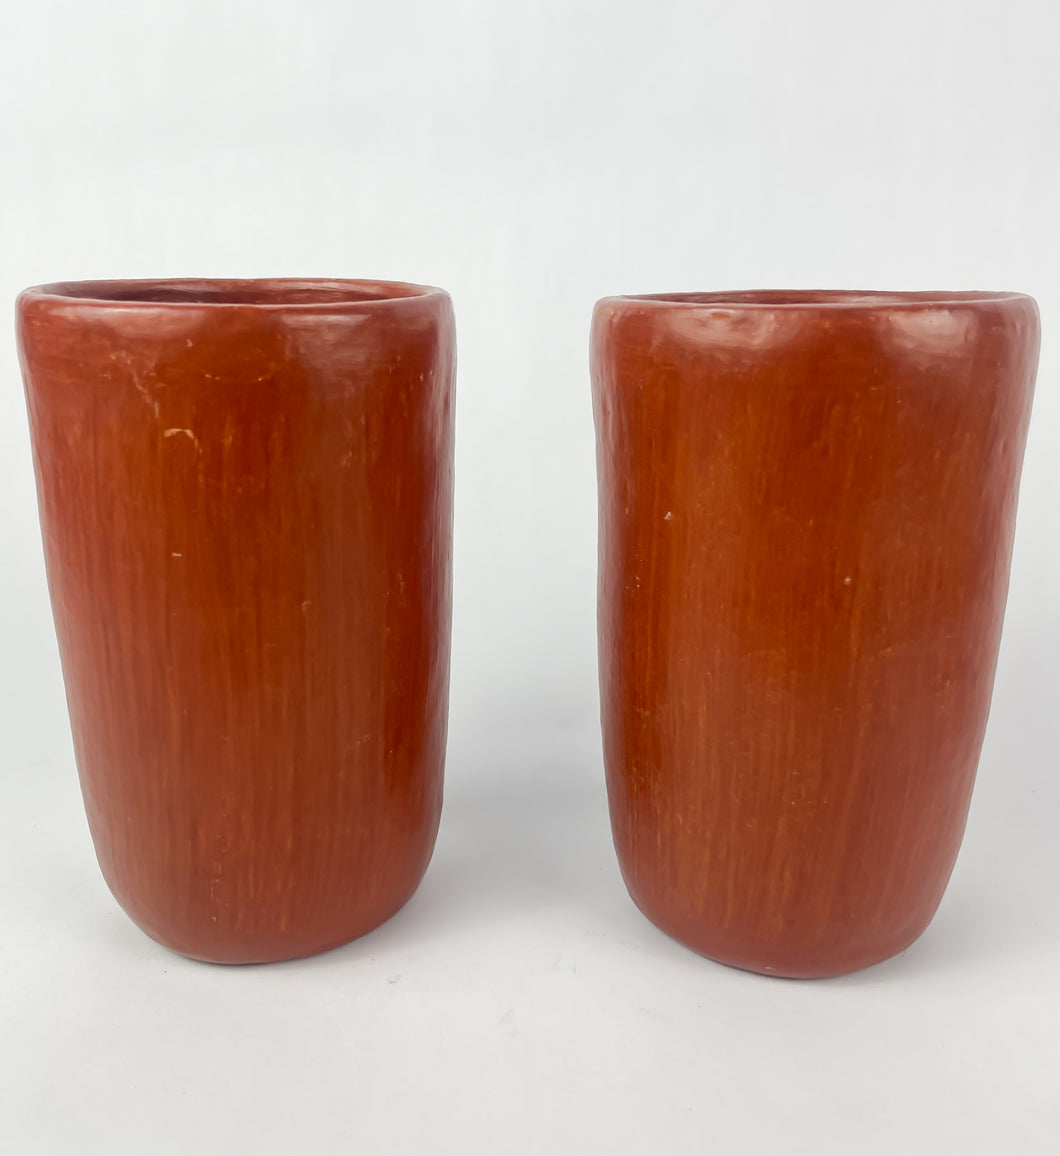 Oaxaca Red Clay Pottery Cups Set of 2 Tumblers Vasos Barro Mexican Red Clay Pottery Oaxaca Clay Pottery San Marcos Tlapazola Red Clay Pottery